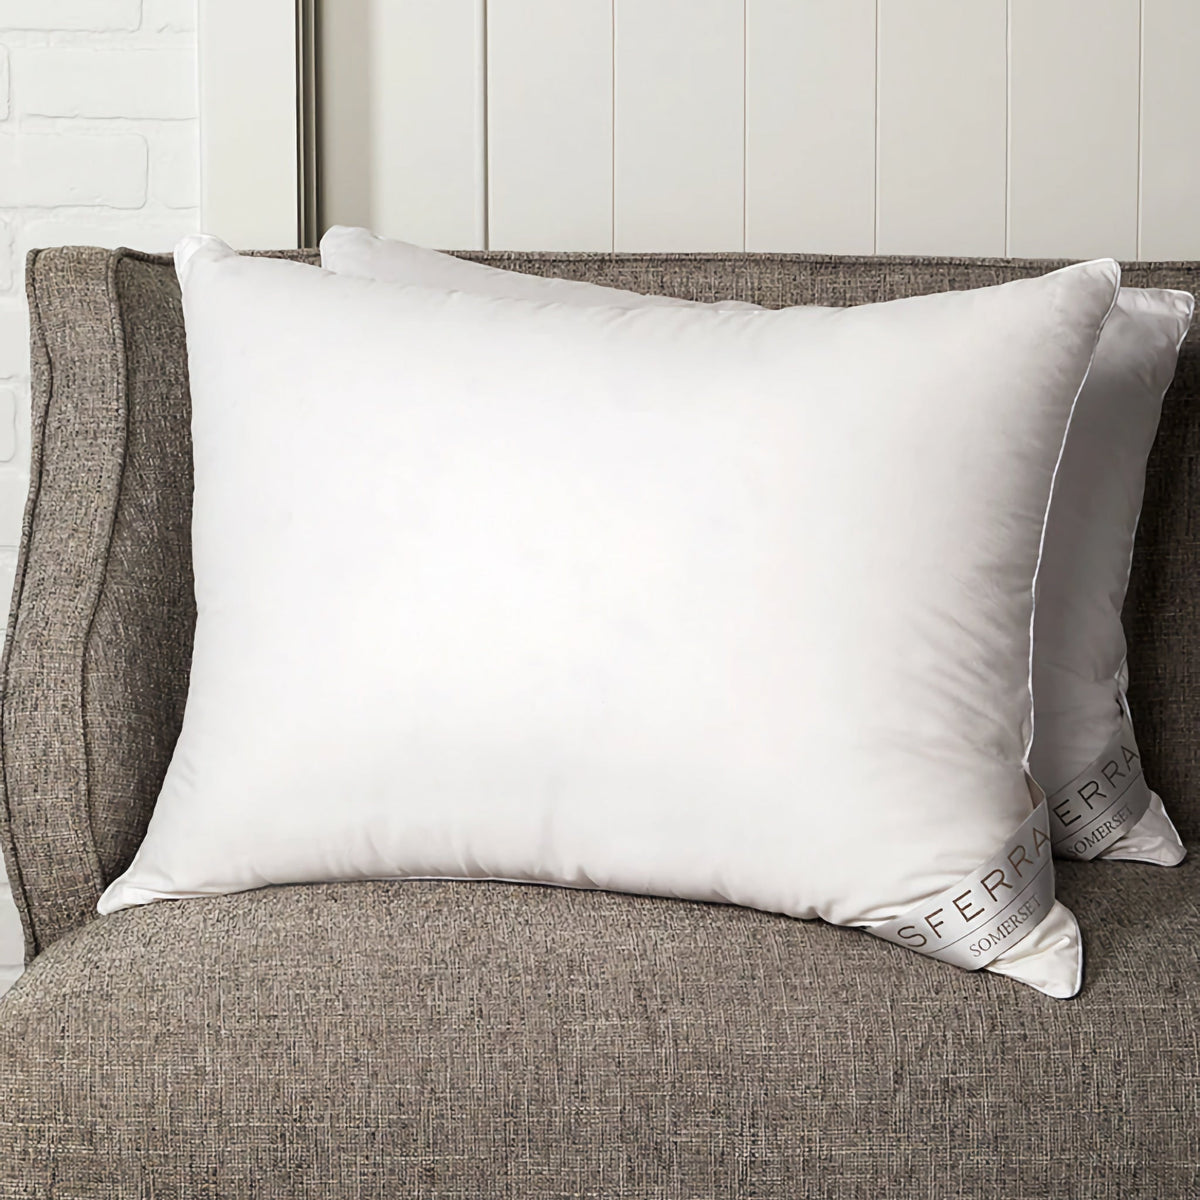 Two Sferra Somerset Down Pillows on a couch